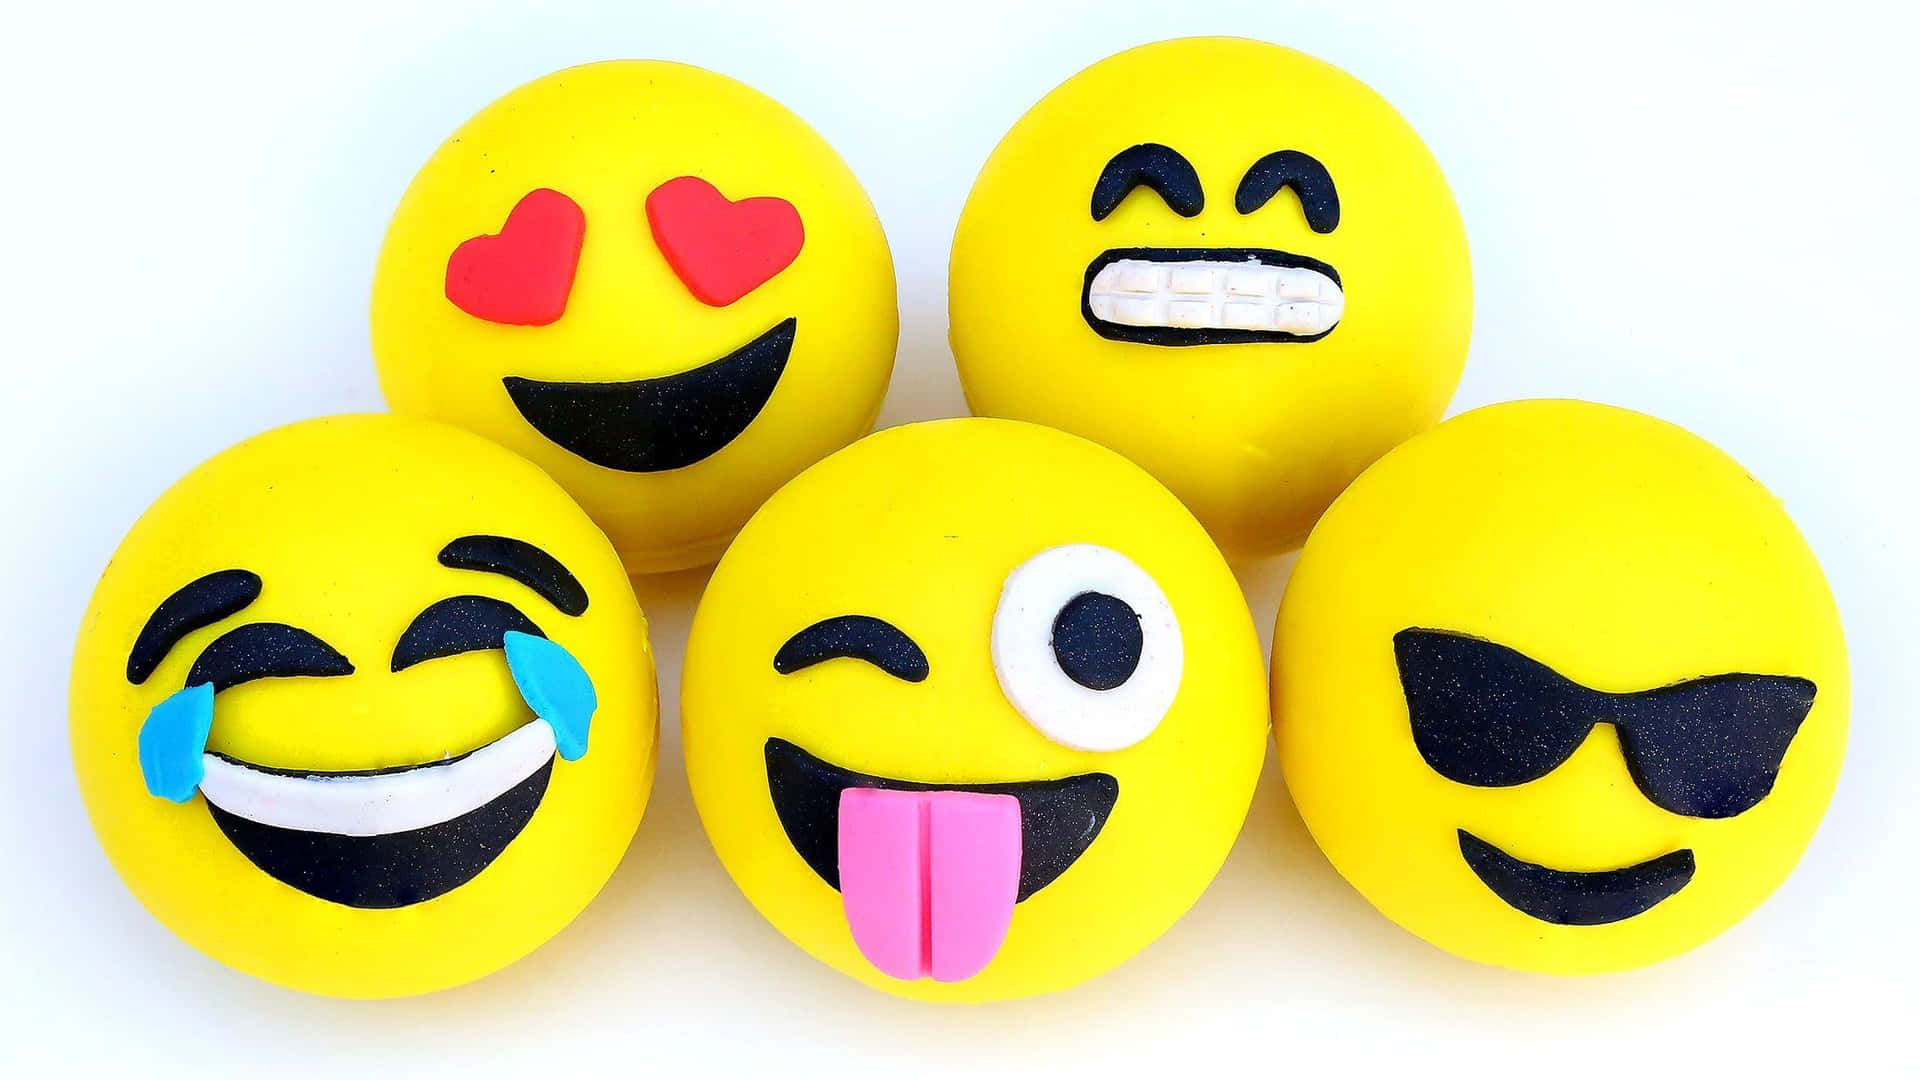 Add a Bit of Fun to Your Day With This Cute Emoji Wallpaper